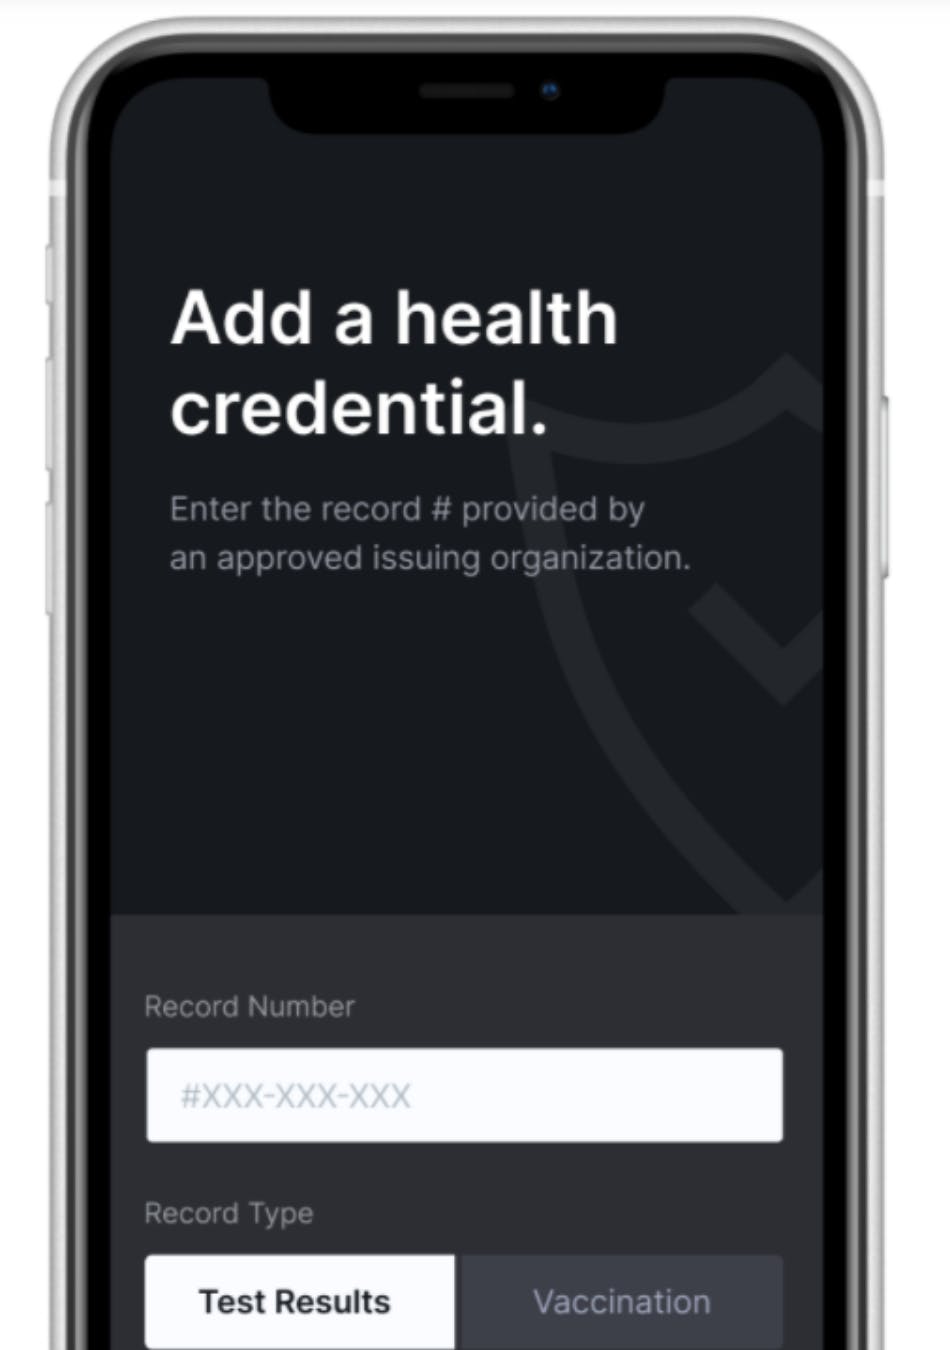 Phone screen with VOW Digital Health messaging for COVID-19 screening | PartySlate